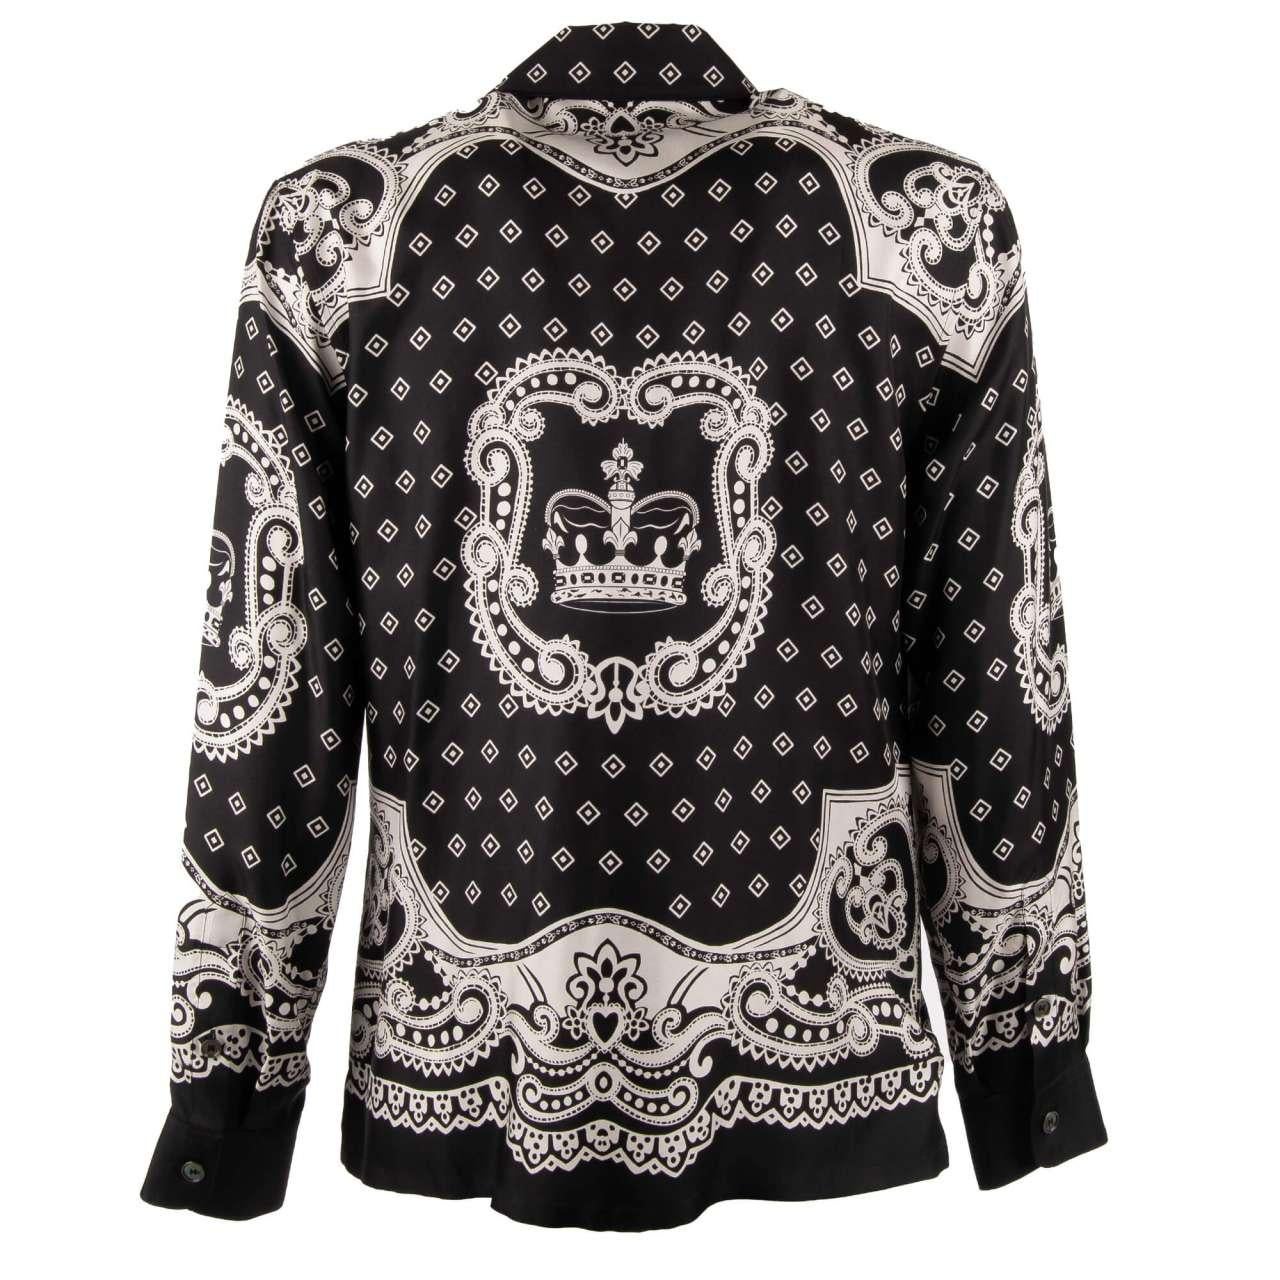 - Silk shirt with crown, geometric print and front pocket in black and white by DOLCE & GABBANA - New with tag - MADE IN ITALY - Former RRP: EUR 1,250 - Wide Fit - Model: G5EM2T-FI1KT-HN64C - Material: 100% Silk - Color: Black / White - Collar with